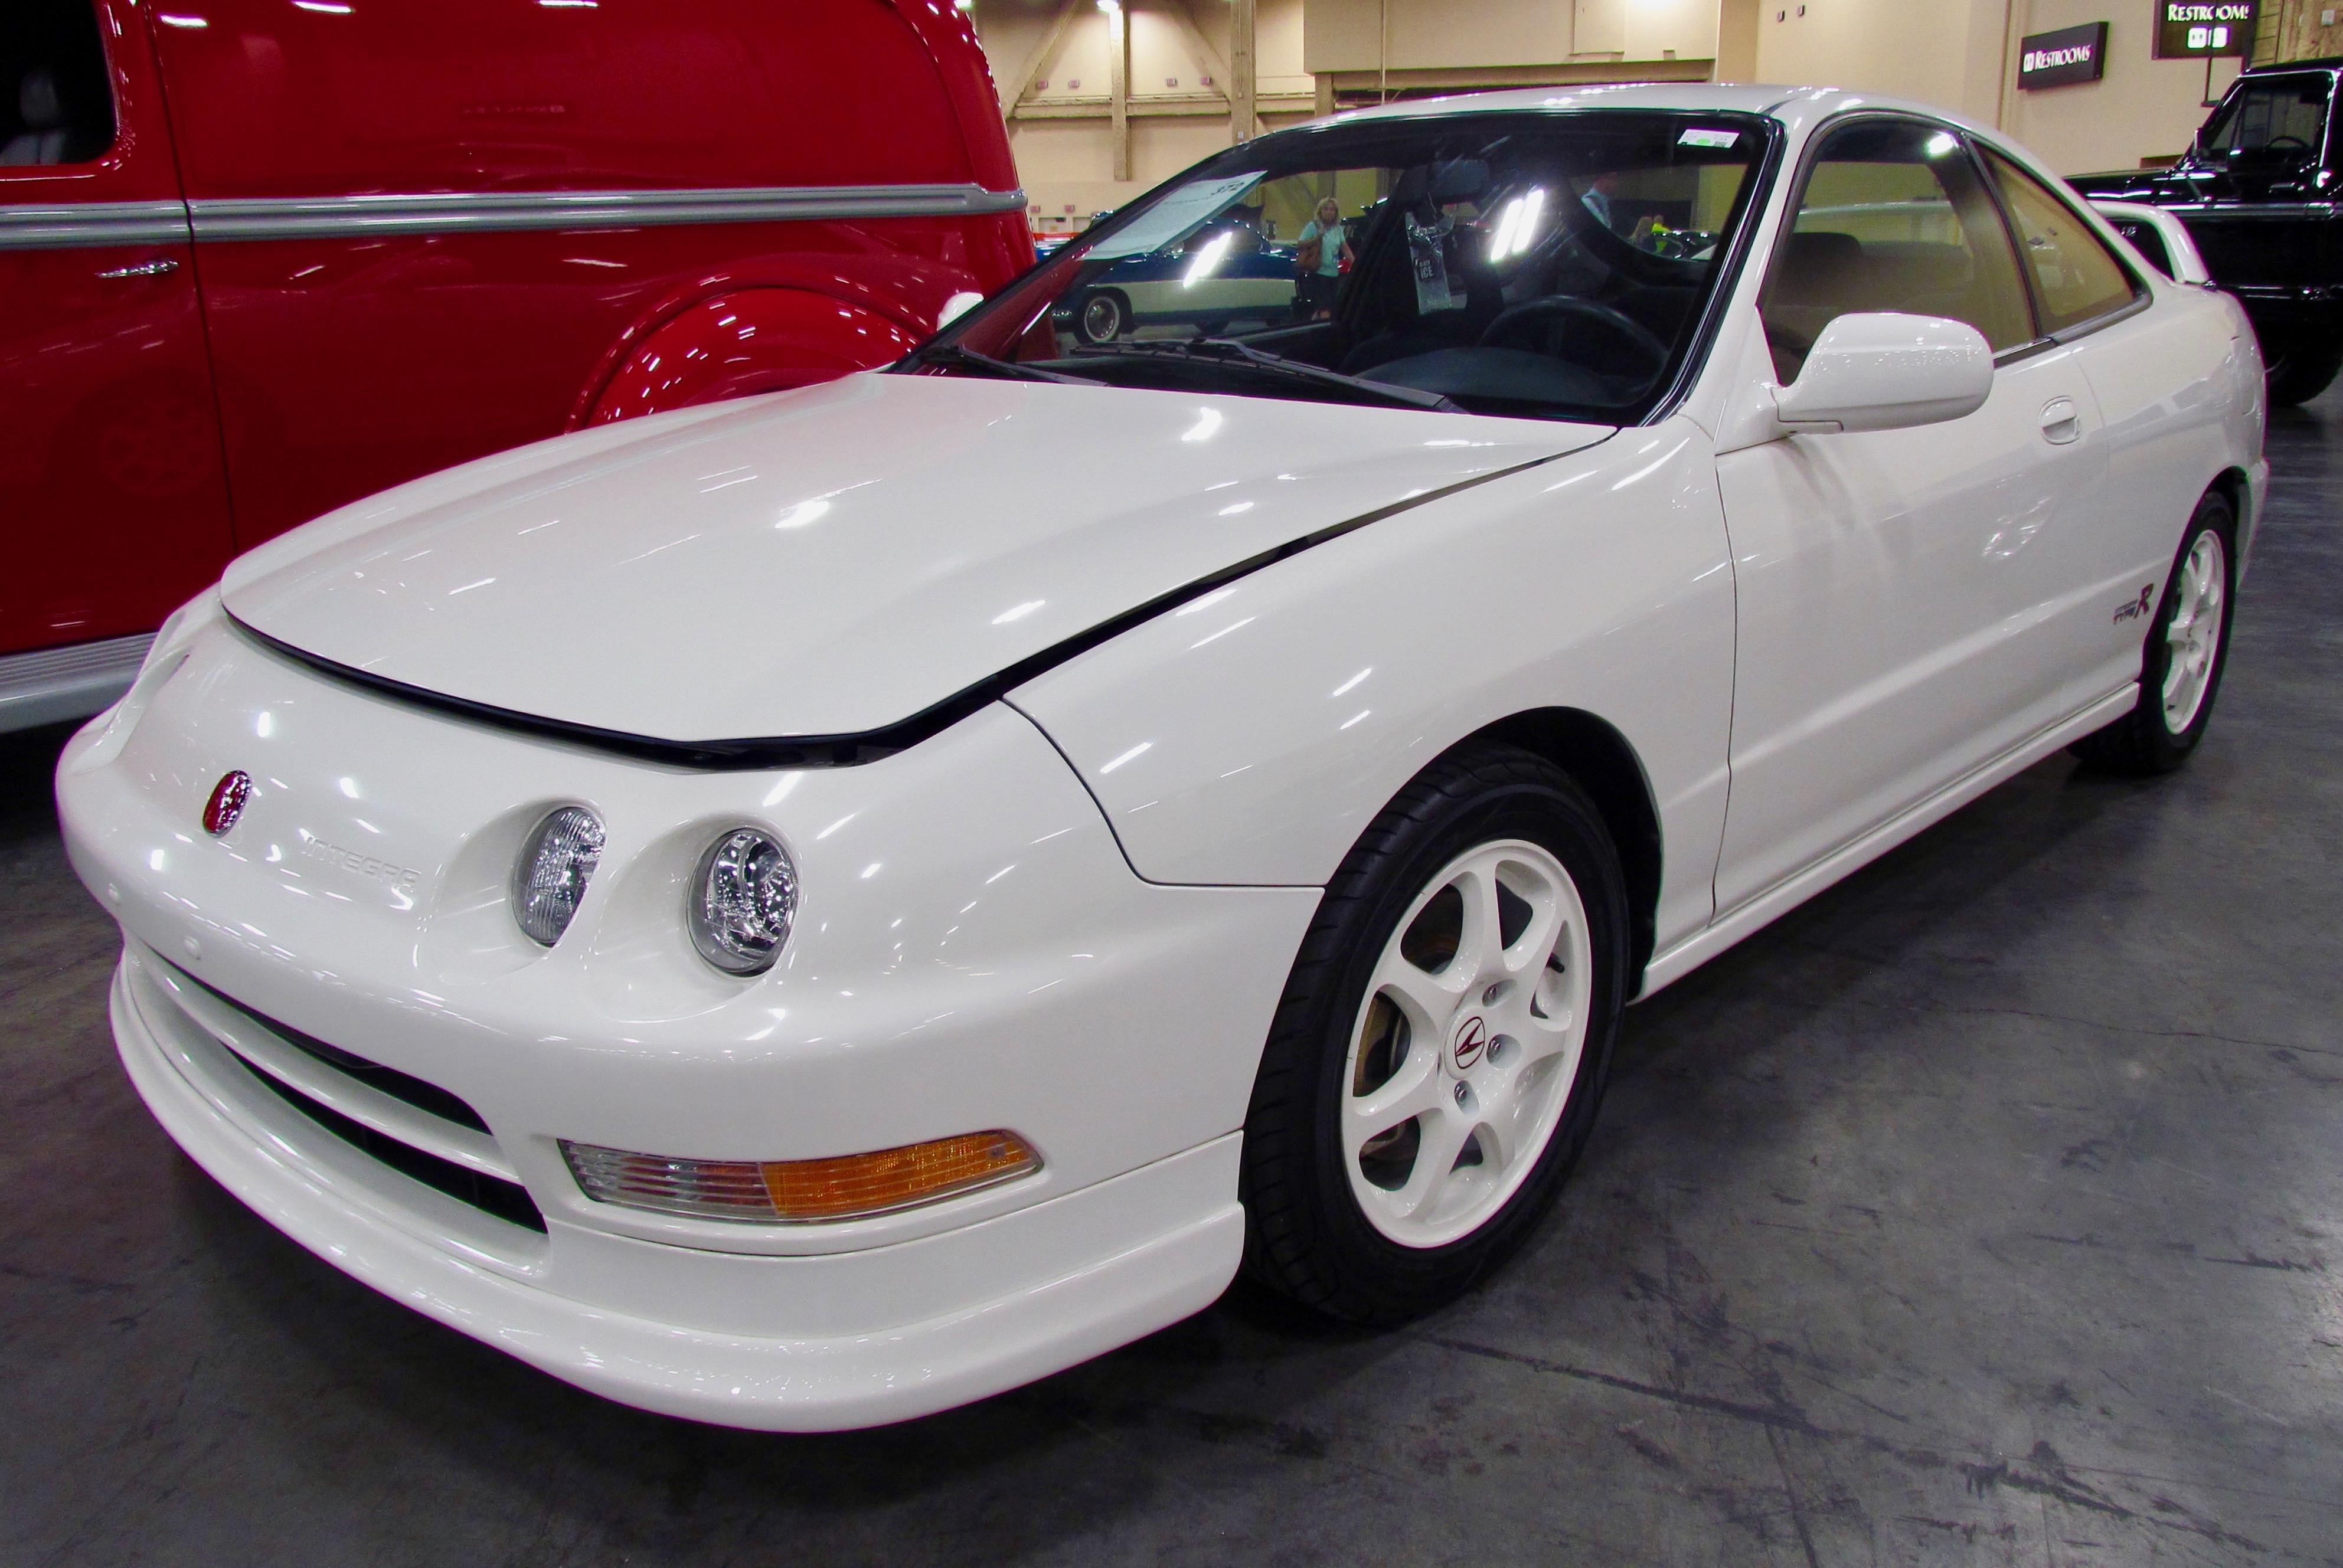 Acura Integra Type R, Was sale of ’97 Integra Type R a seminal moment for Japanese collector cars?, ClassicCars.com Journal